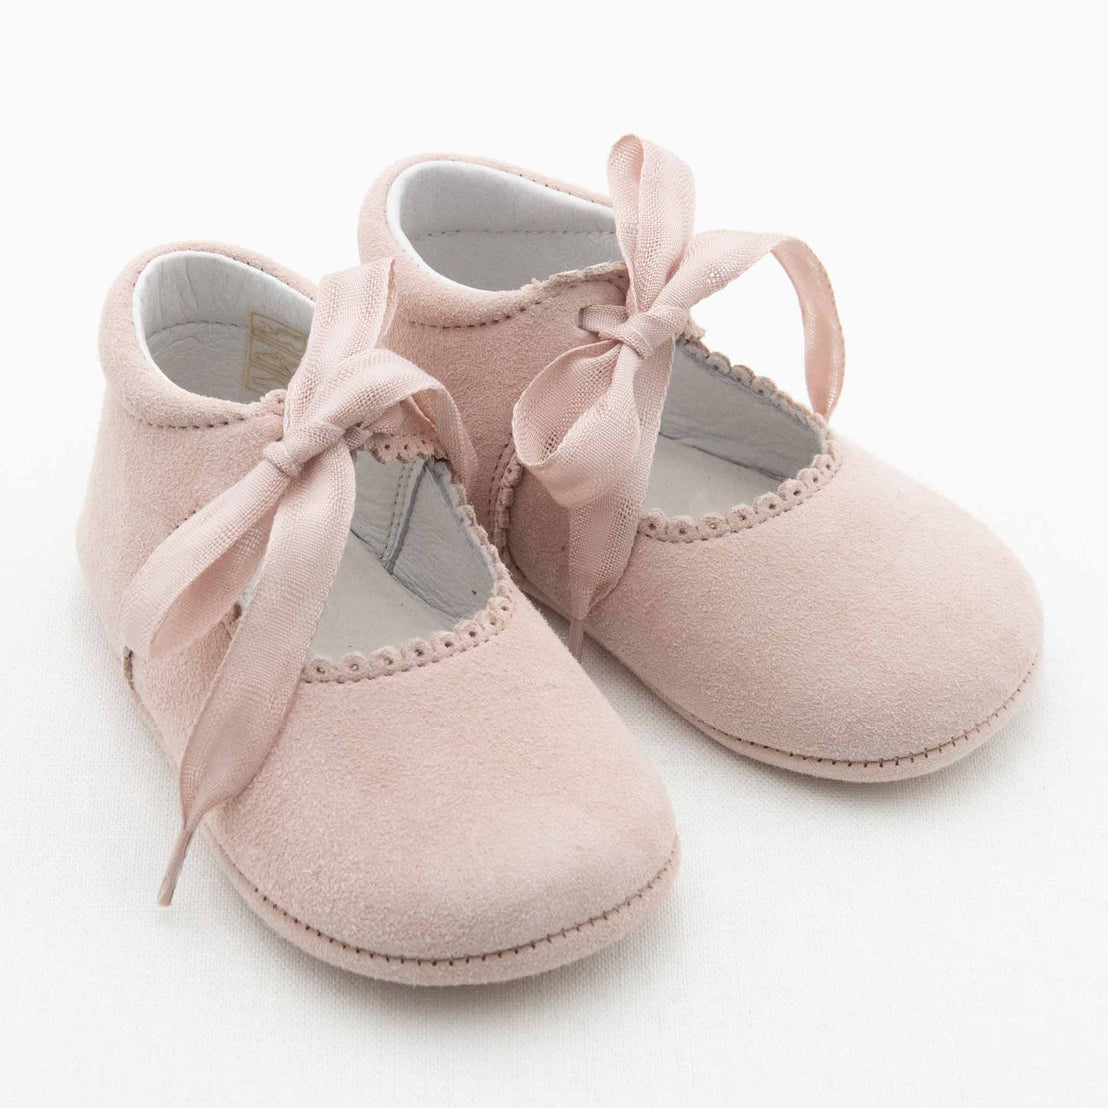 The Thea Suede Tie Mary Janes by Baby Beau & Belle are a pair of light pink handmade baby shoes featuring a velvet texture and satin ribbons. These shoes have scalloped edges, a soft sole, and are designed for infants. They are styled as Mary Janes and photographed against a white background.